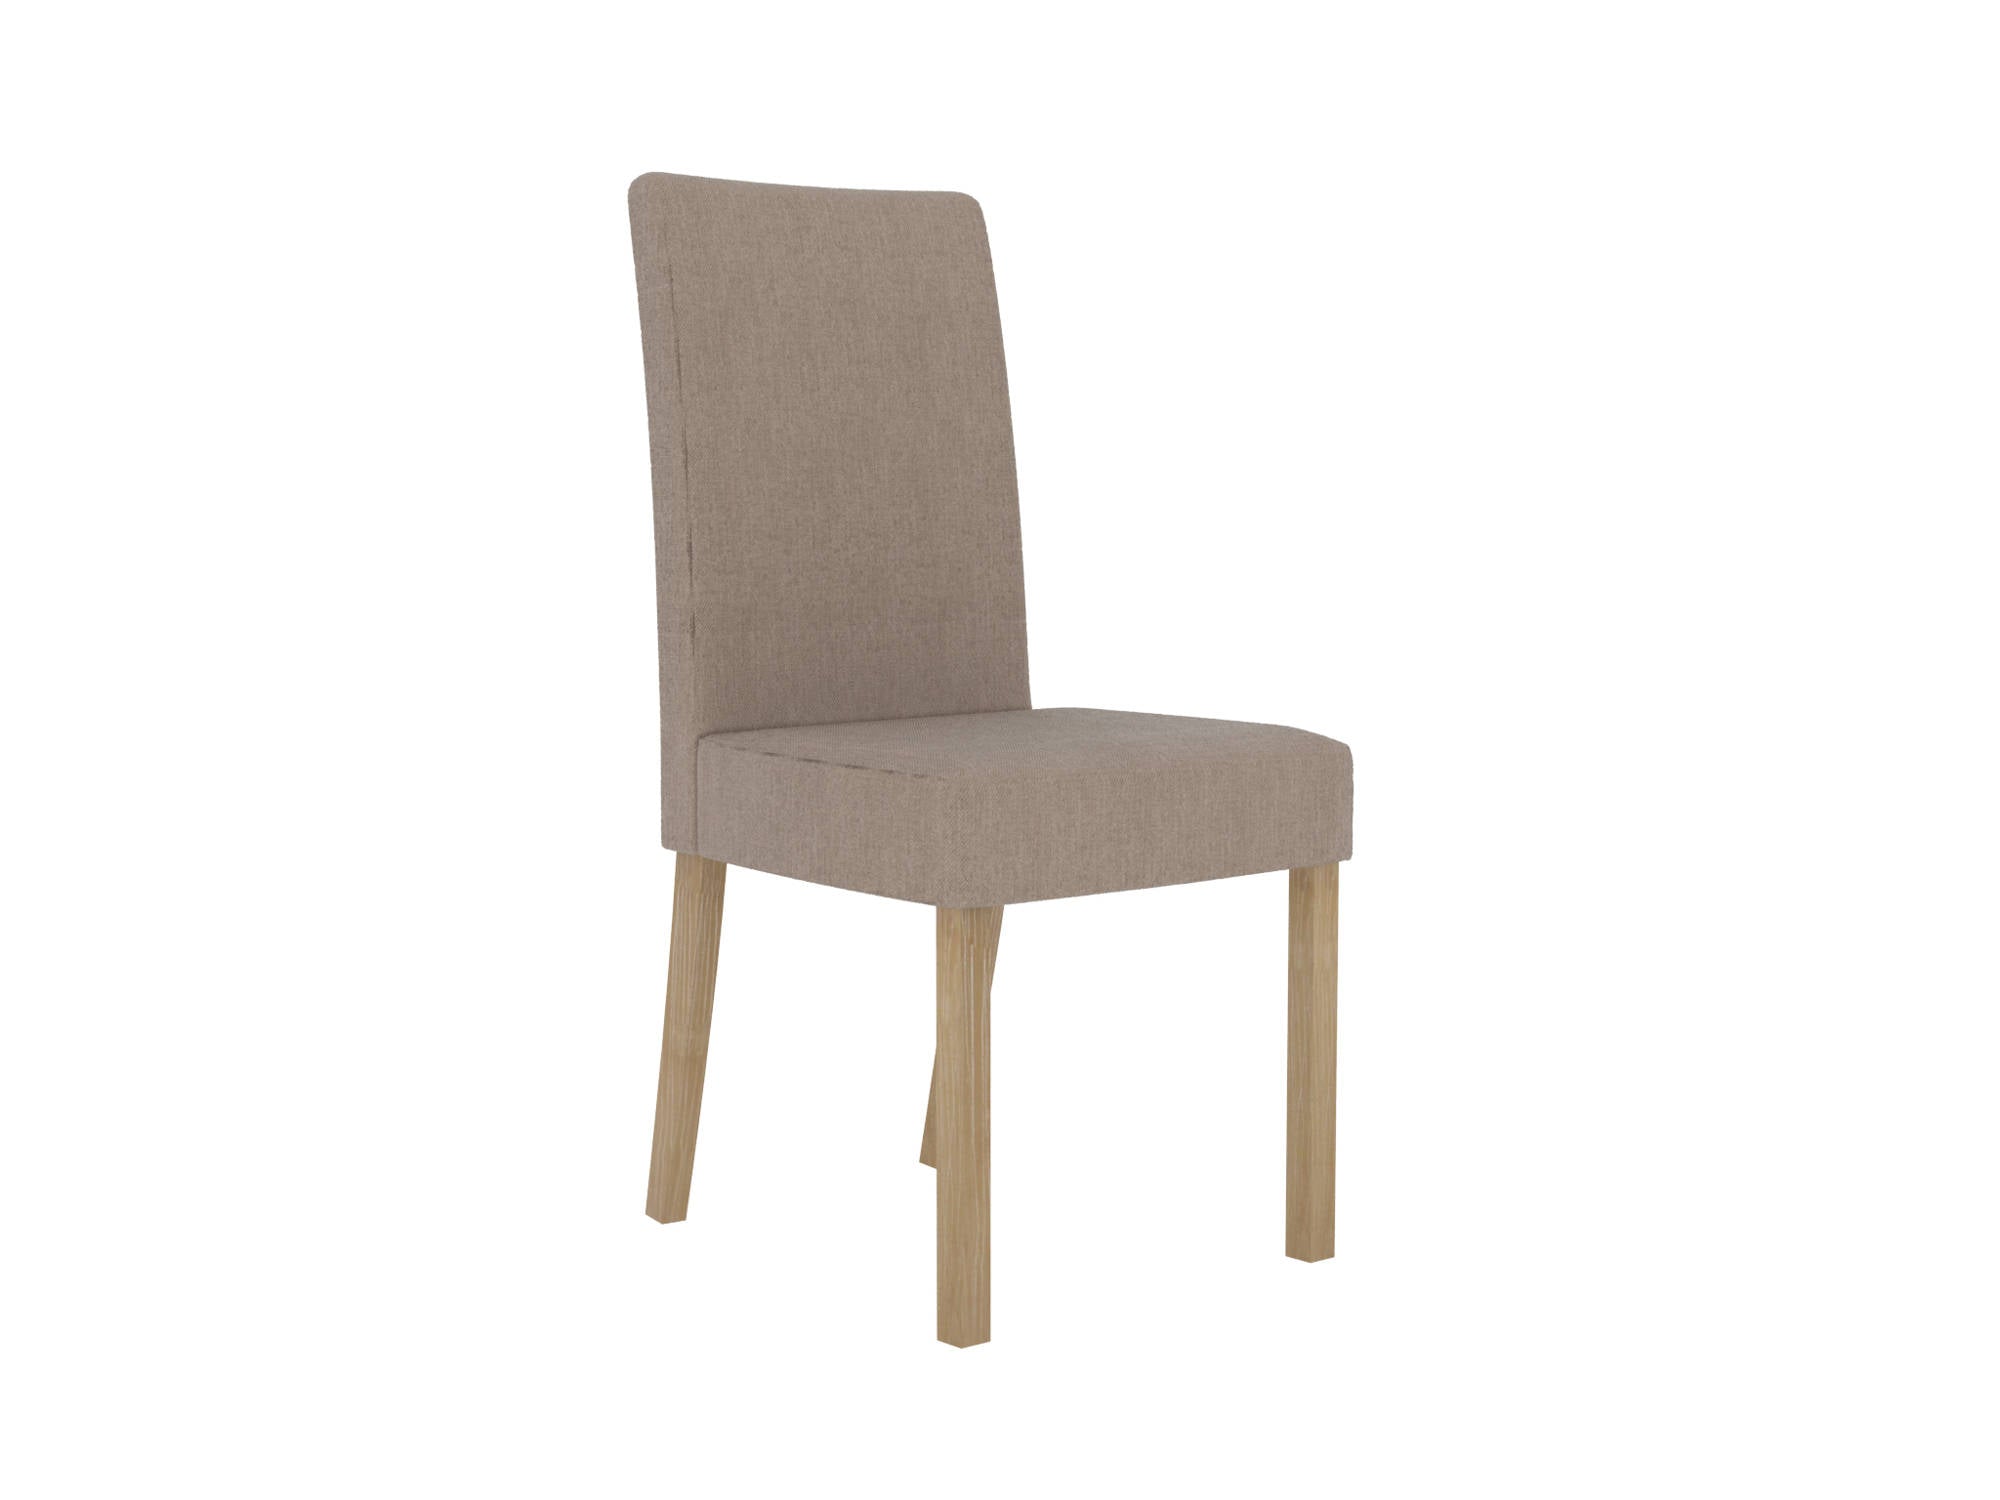 Carillon Dining Chairs in Beige - Ezzo